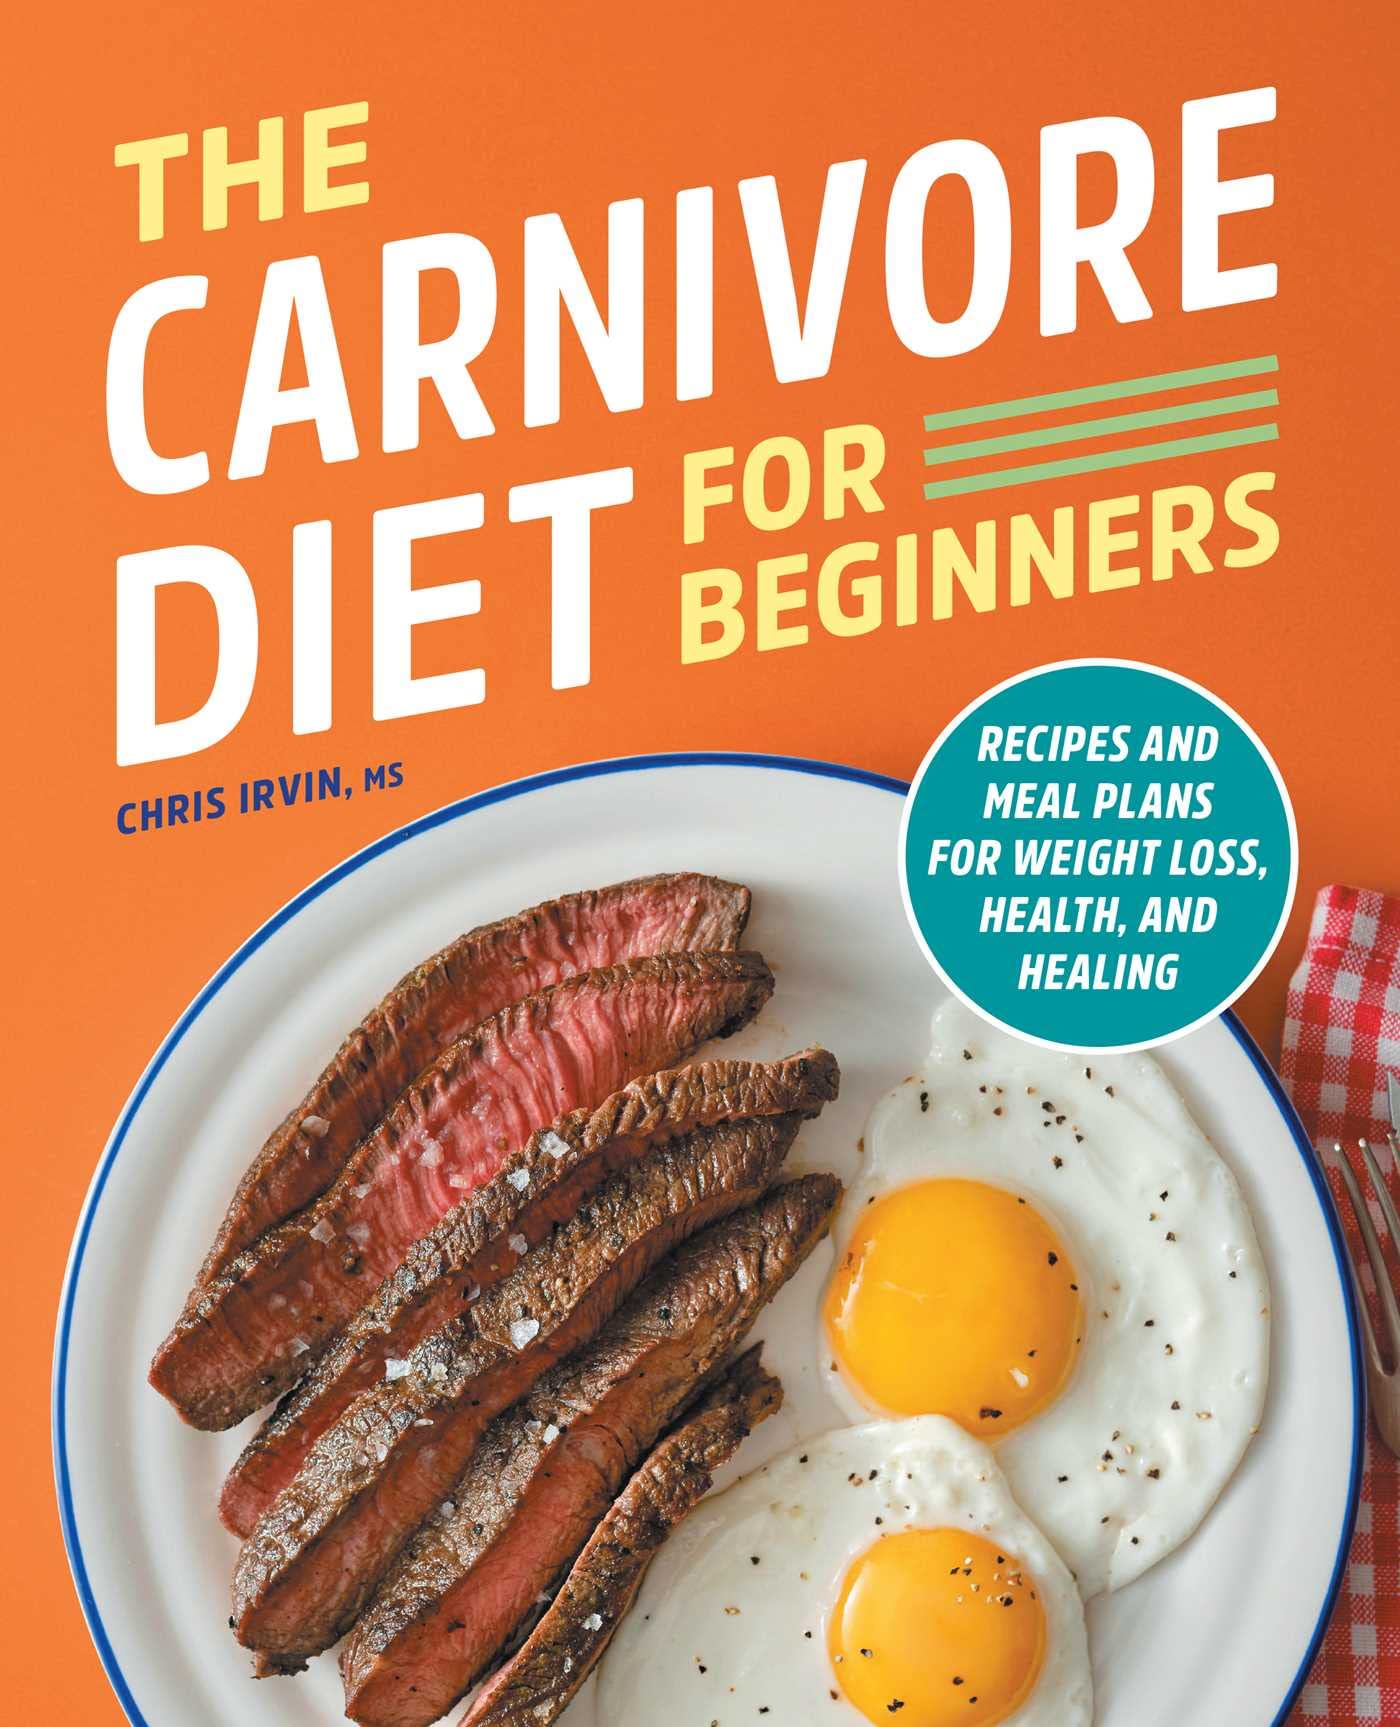 The Carnivore Diet for Beginners: Recipes and Meal Plans for Weight Loss, Health, and Healing by Irvin, Chris